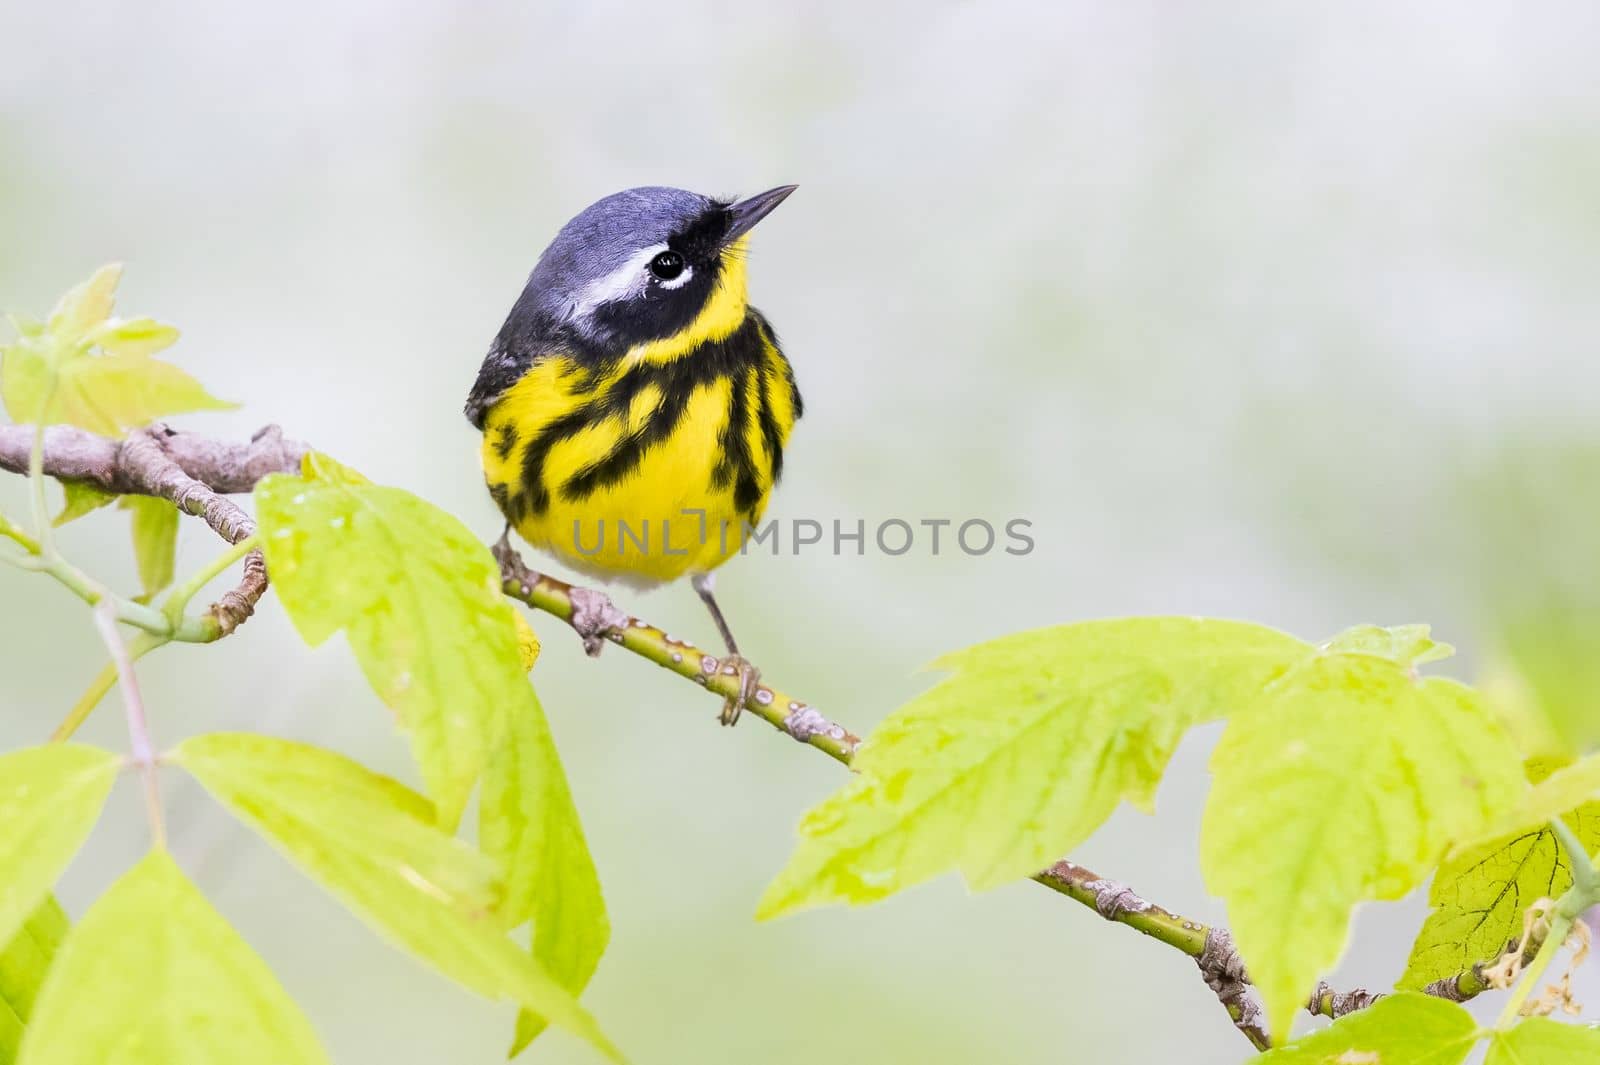 Magnolia warbler perched on a branch in spring by Rajh_Photography